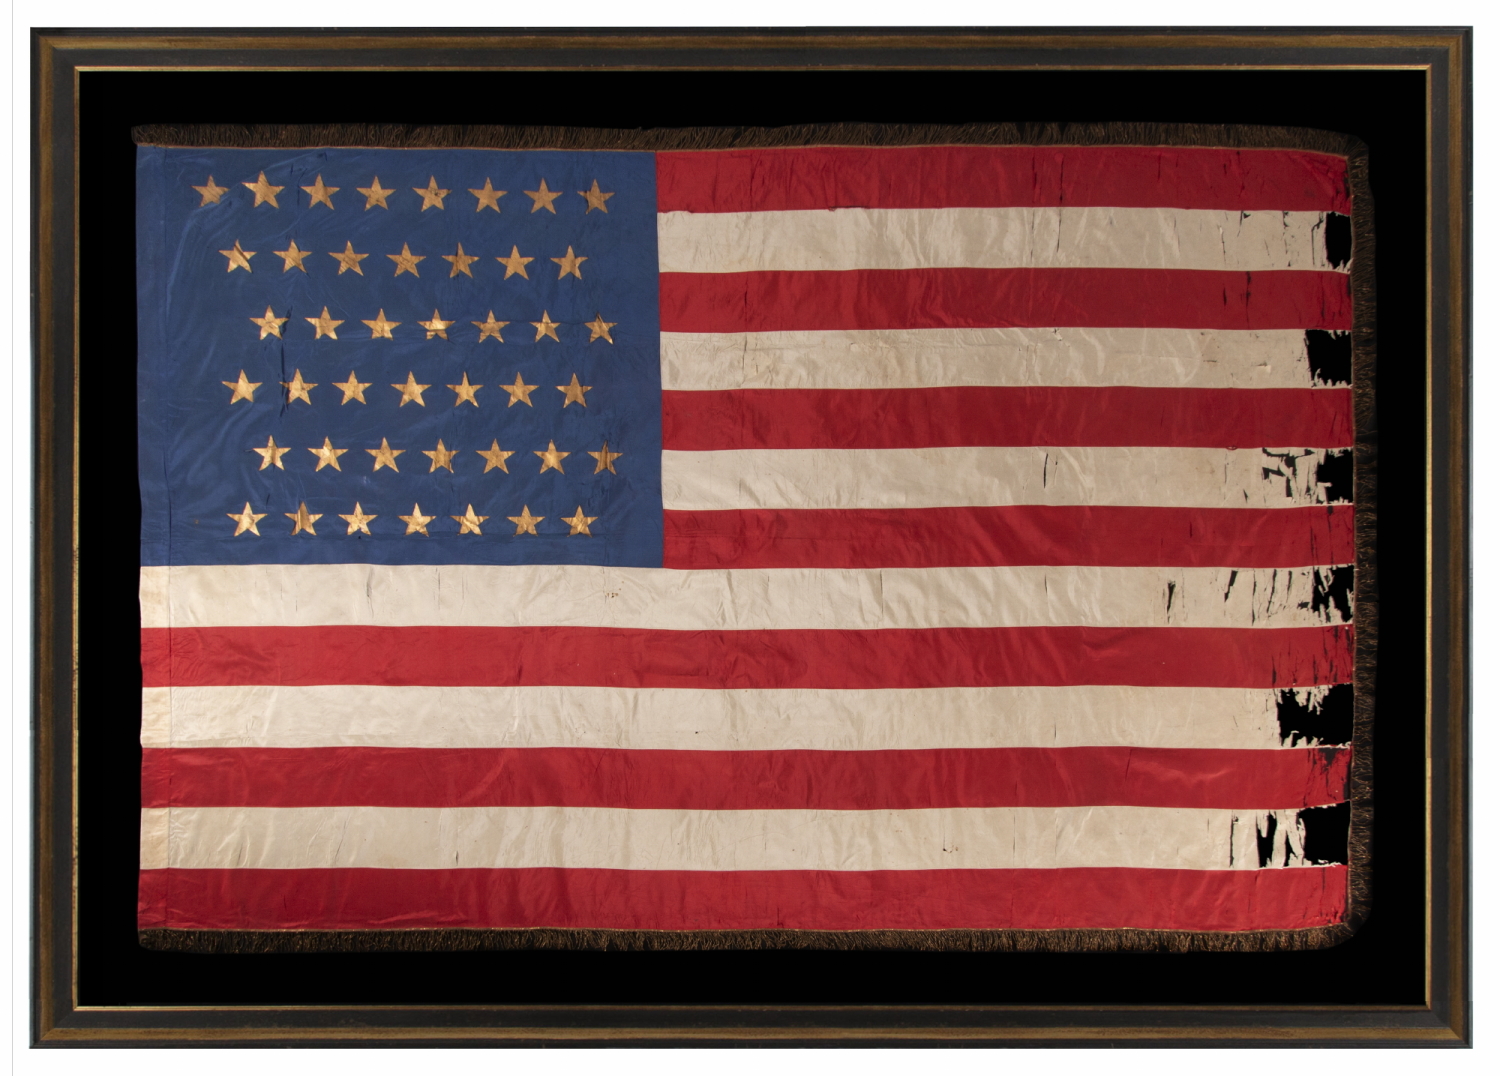 43 GILT-PAINTED STARS ON A SILK, ANTIQUE AMERICAN FLAG WITH BULLION FRINGE; REFLECTS THE ADDITION OF IDAHO AS THE 43RD STATE ON JULY 3RD, 1890, ONE OF THE RAREST STAR COUNTS AMONG SURVIVING AMERICAN FLAGS OF THE 19TH CENTURY